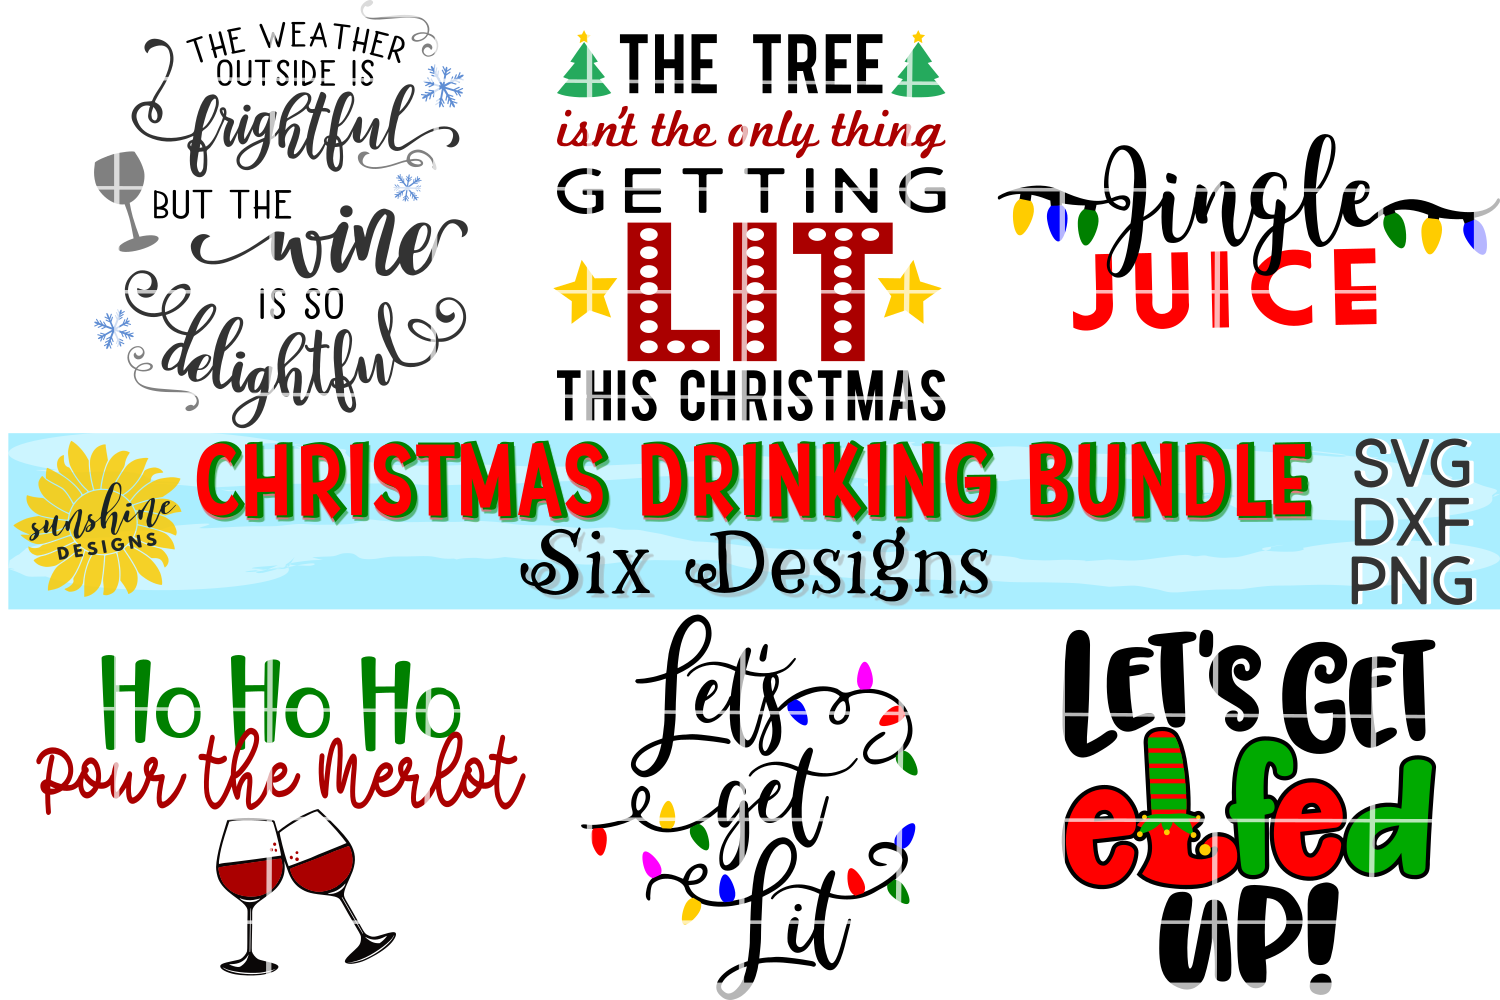 Download CHRISTMAS DRINKING / WINE BUNDLE SVG DXF PNG